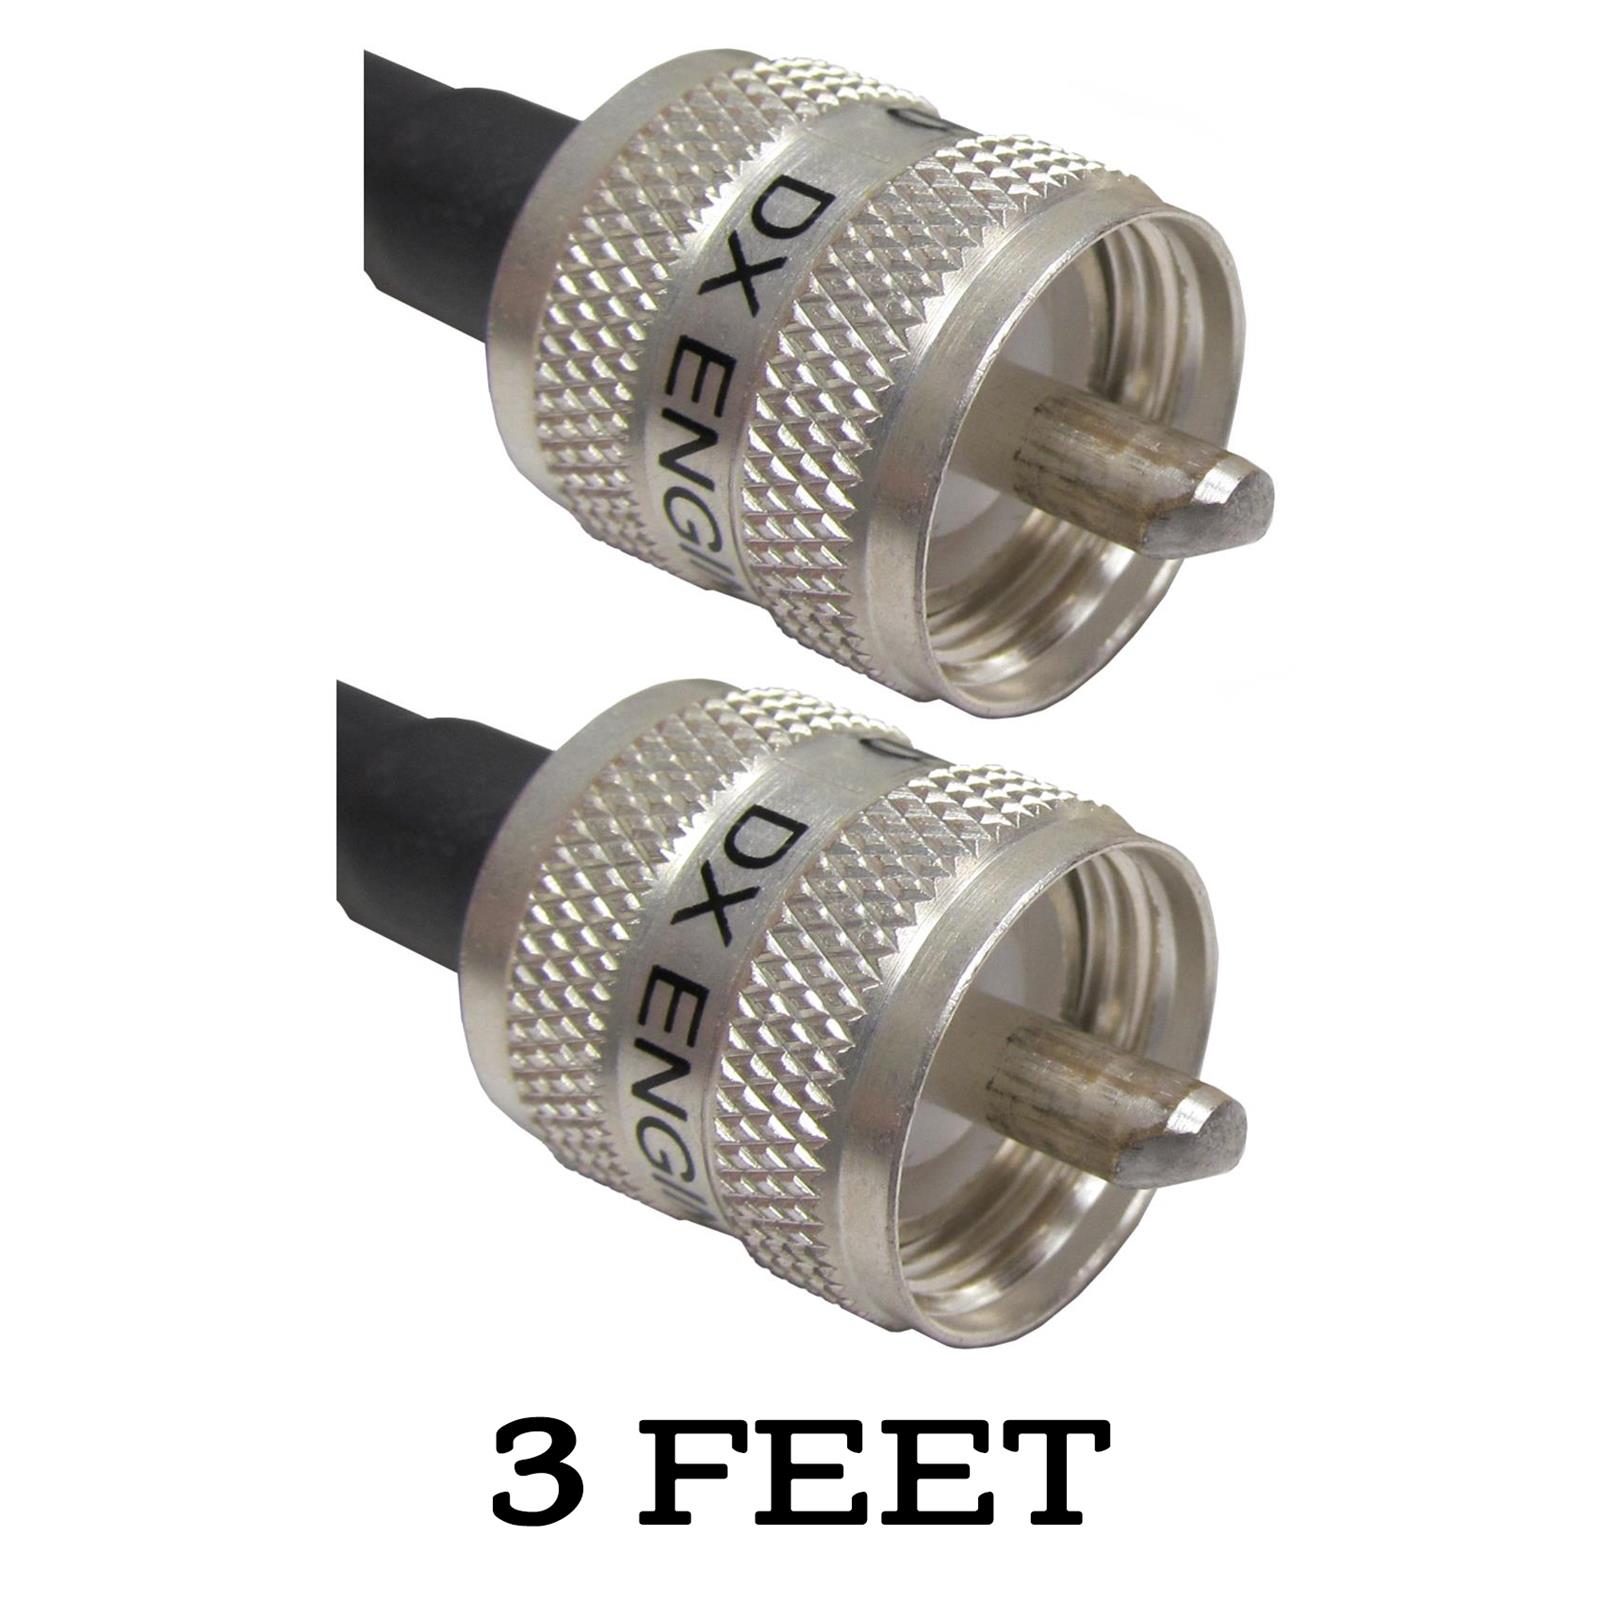 NEW 50 ft RG8X coaxial antenna 50 ohm cable UHF male PL259 plugs *Ships from USA 